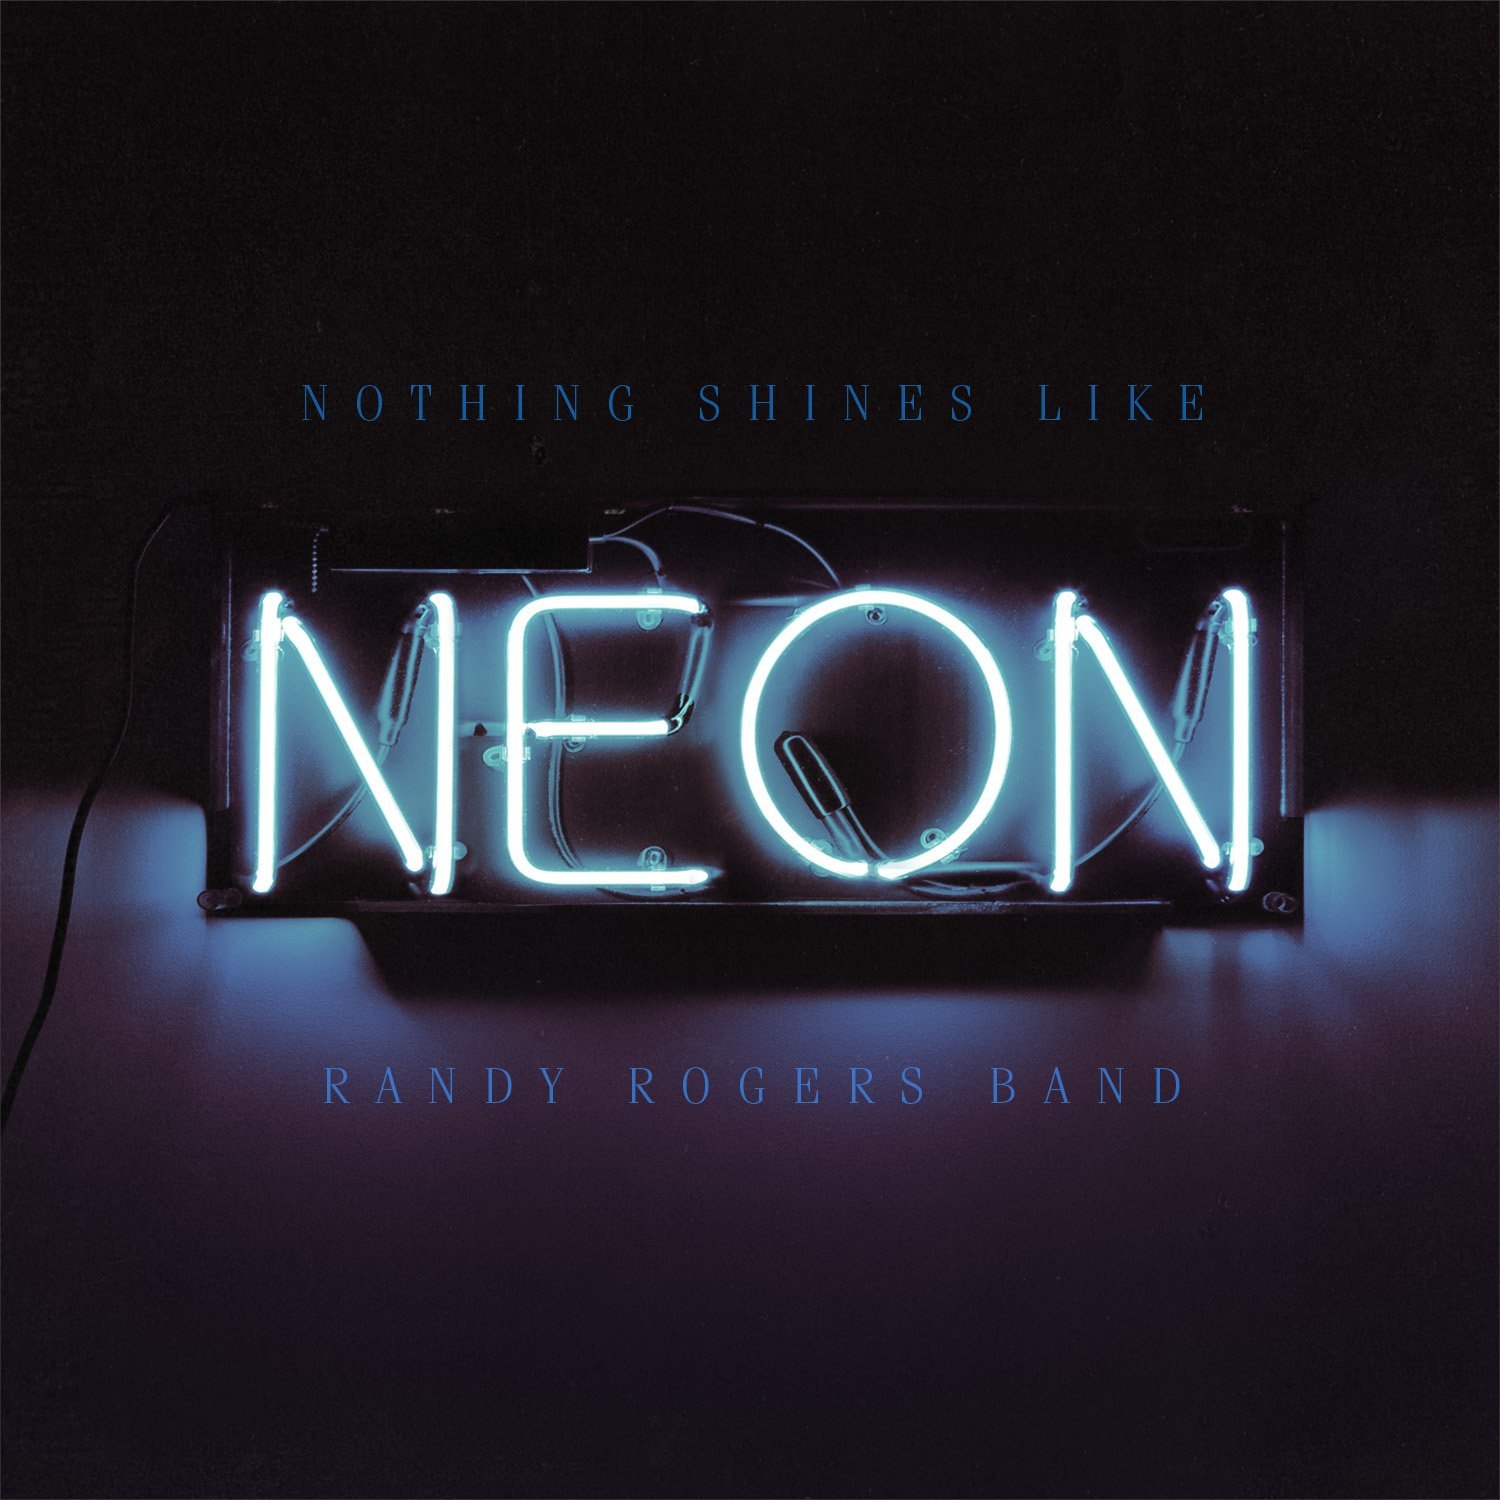 Randy Rogers Band: Nothing Shines Like Neon